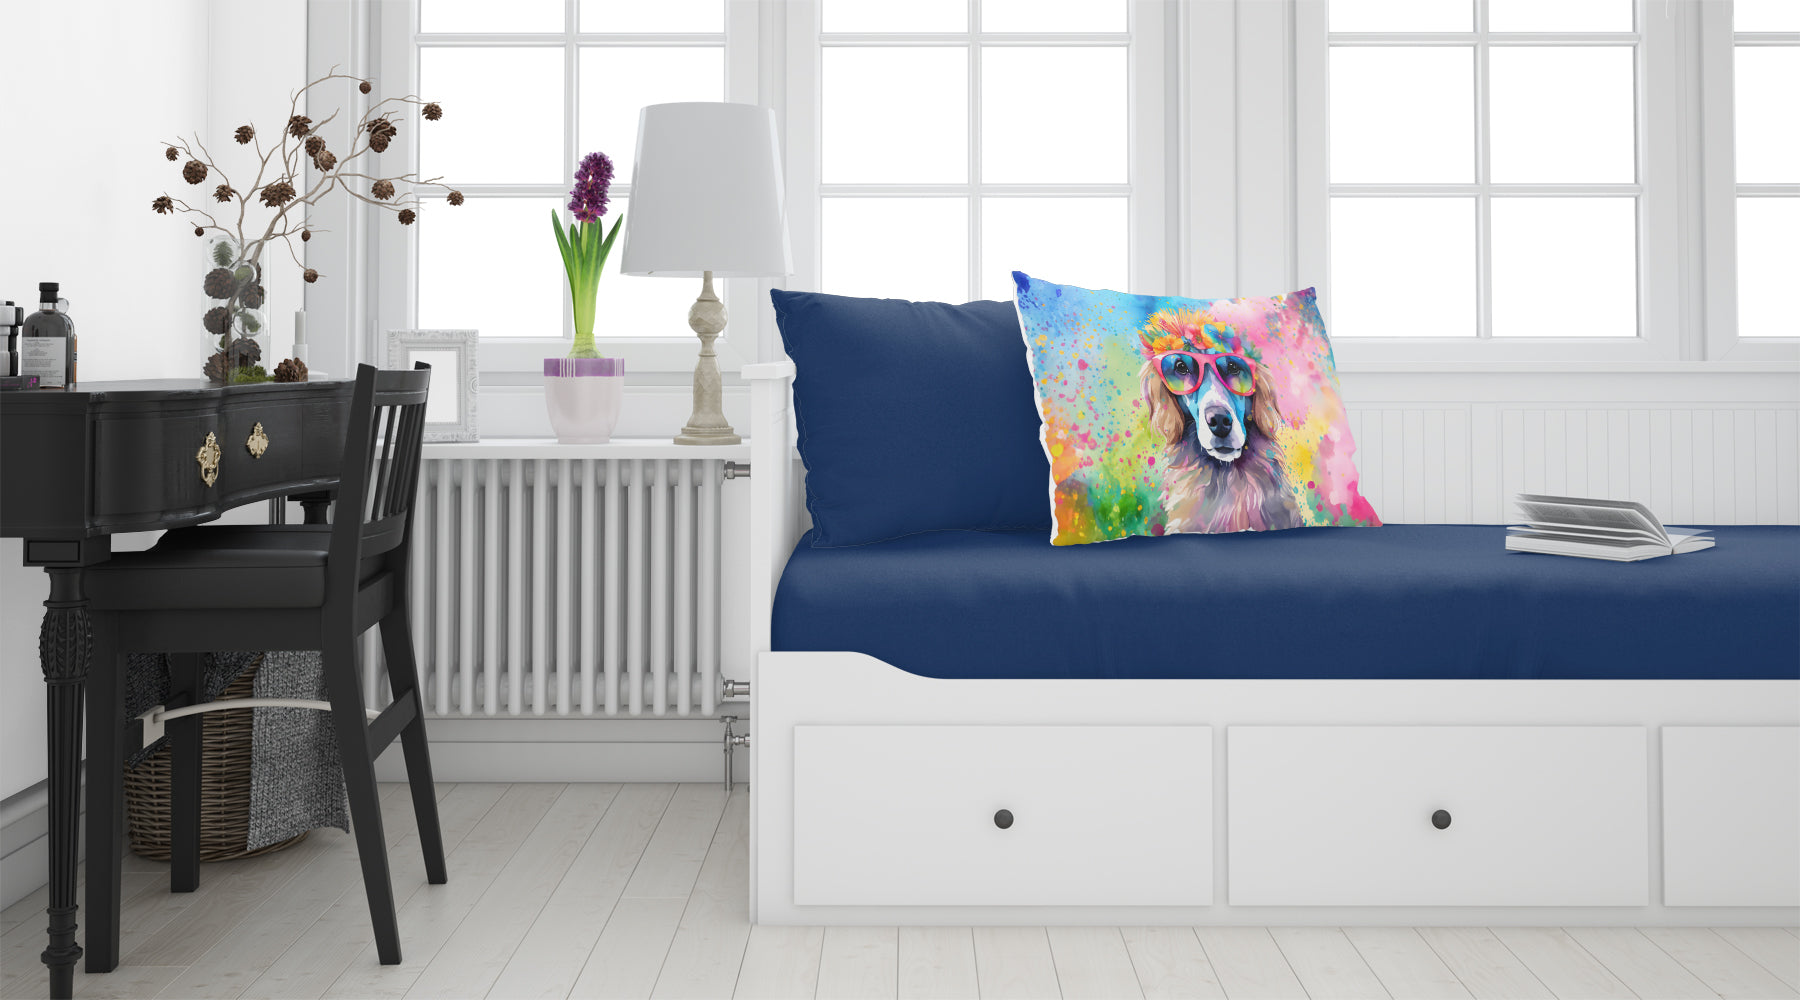 Buy this Poodle Hippie Dawg Standard Pillowcase